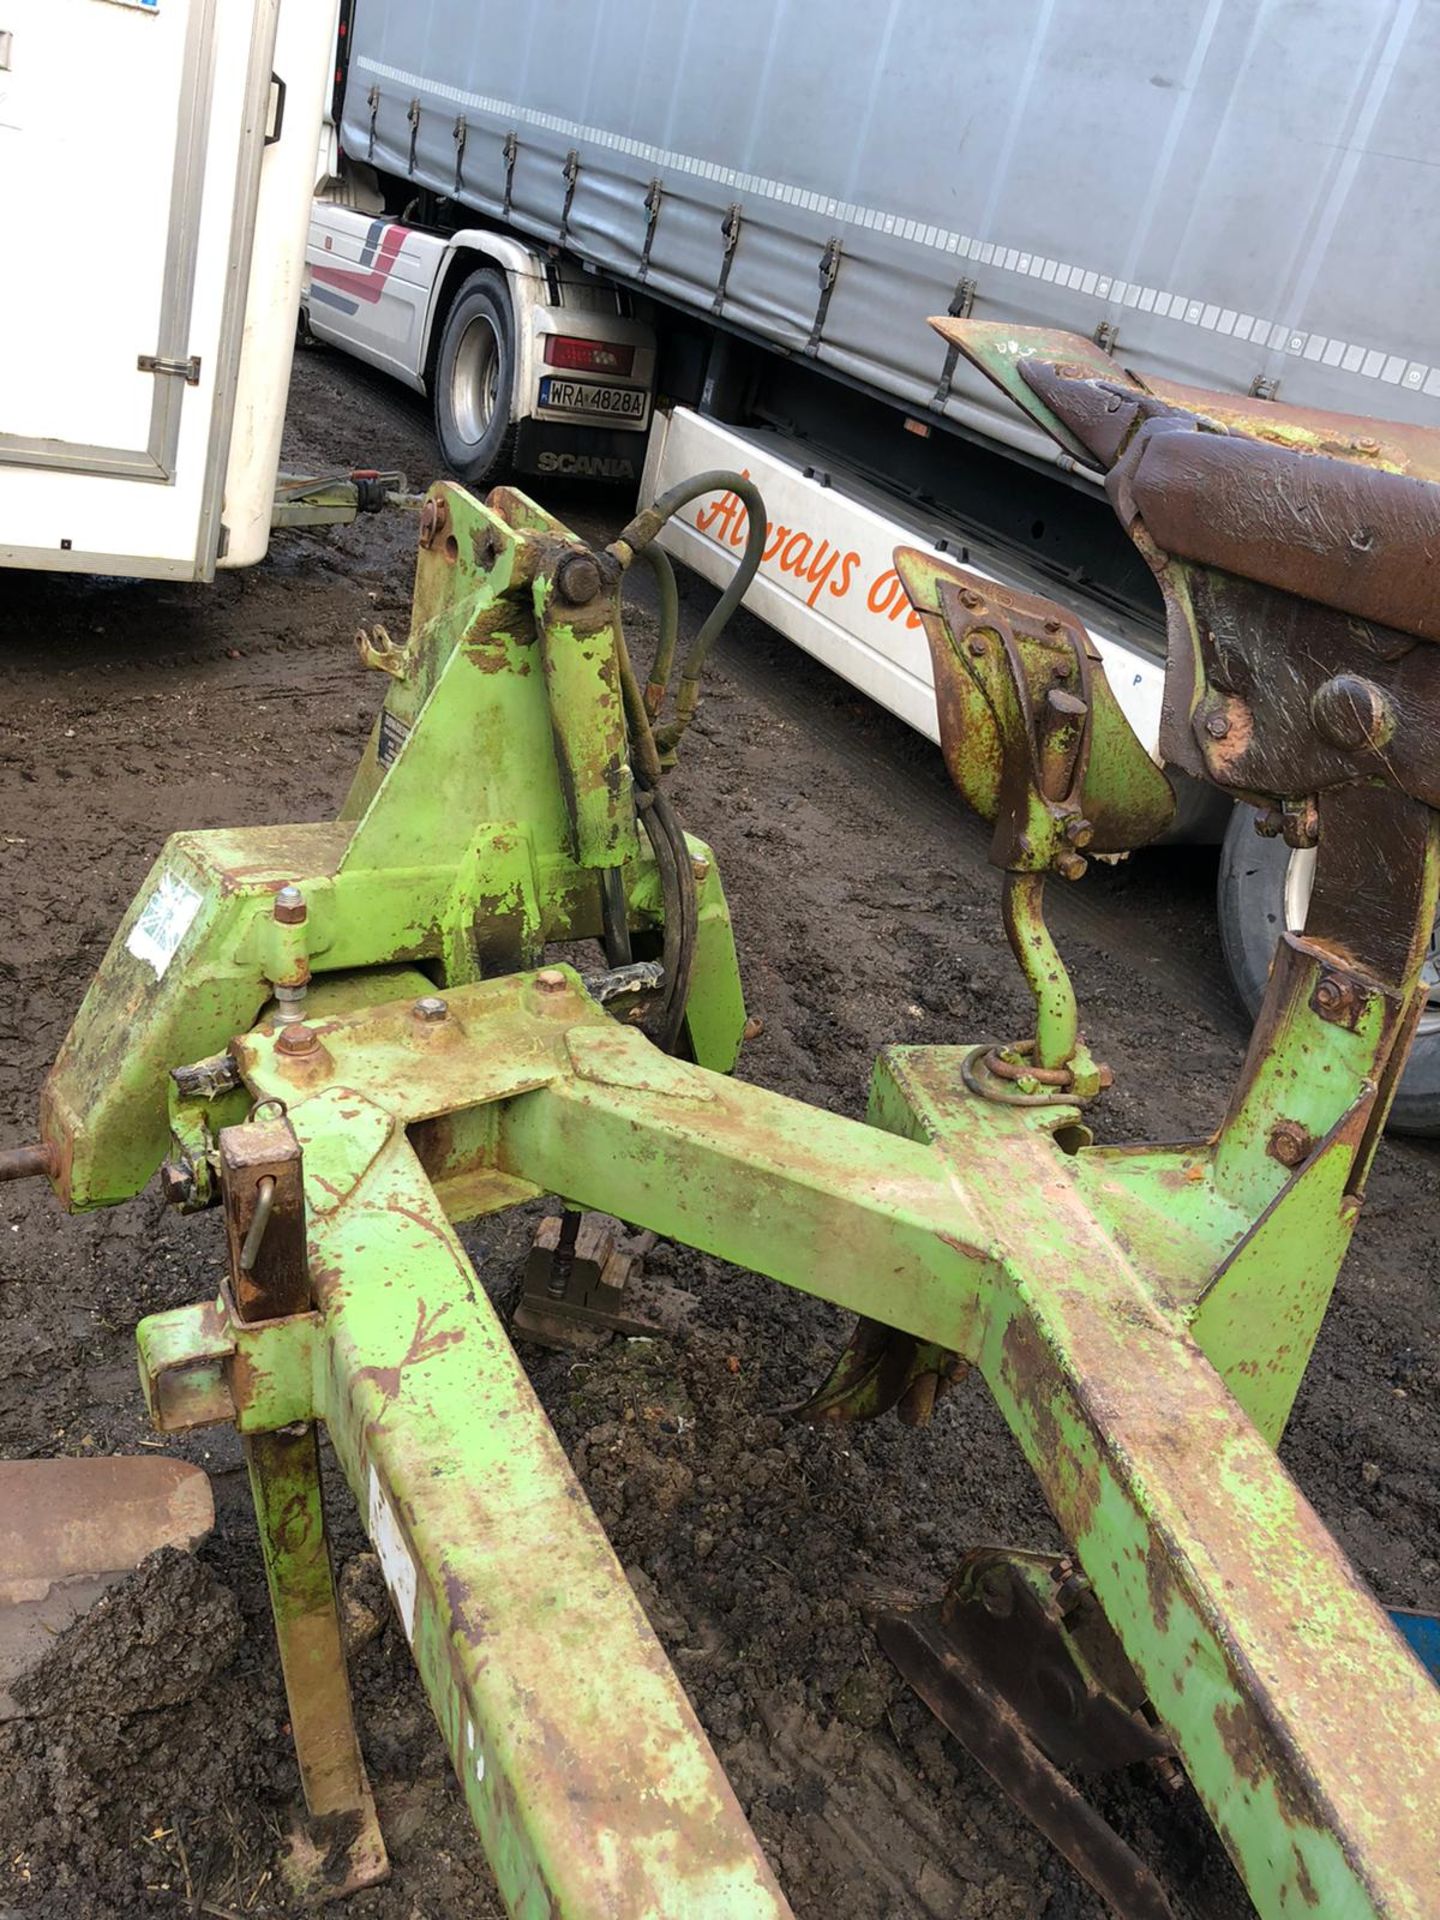 DOWDESWELL DP8B 4 FURROW PLOUGH IN GOOD CONDITION, NO WELD *PLUS VAT* - Image 6 of 8